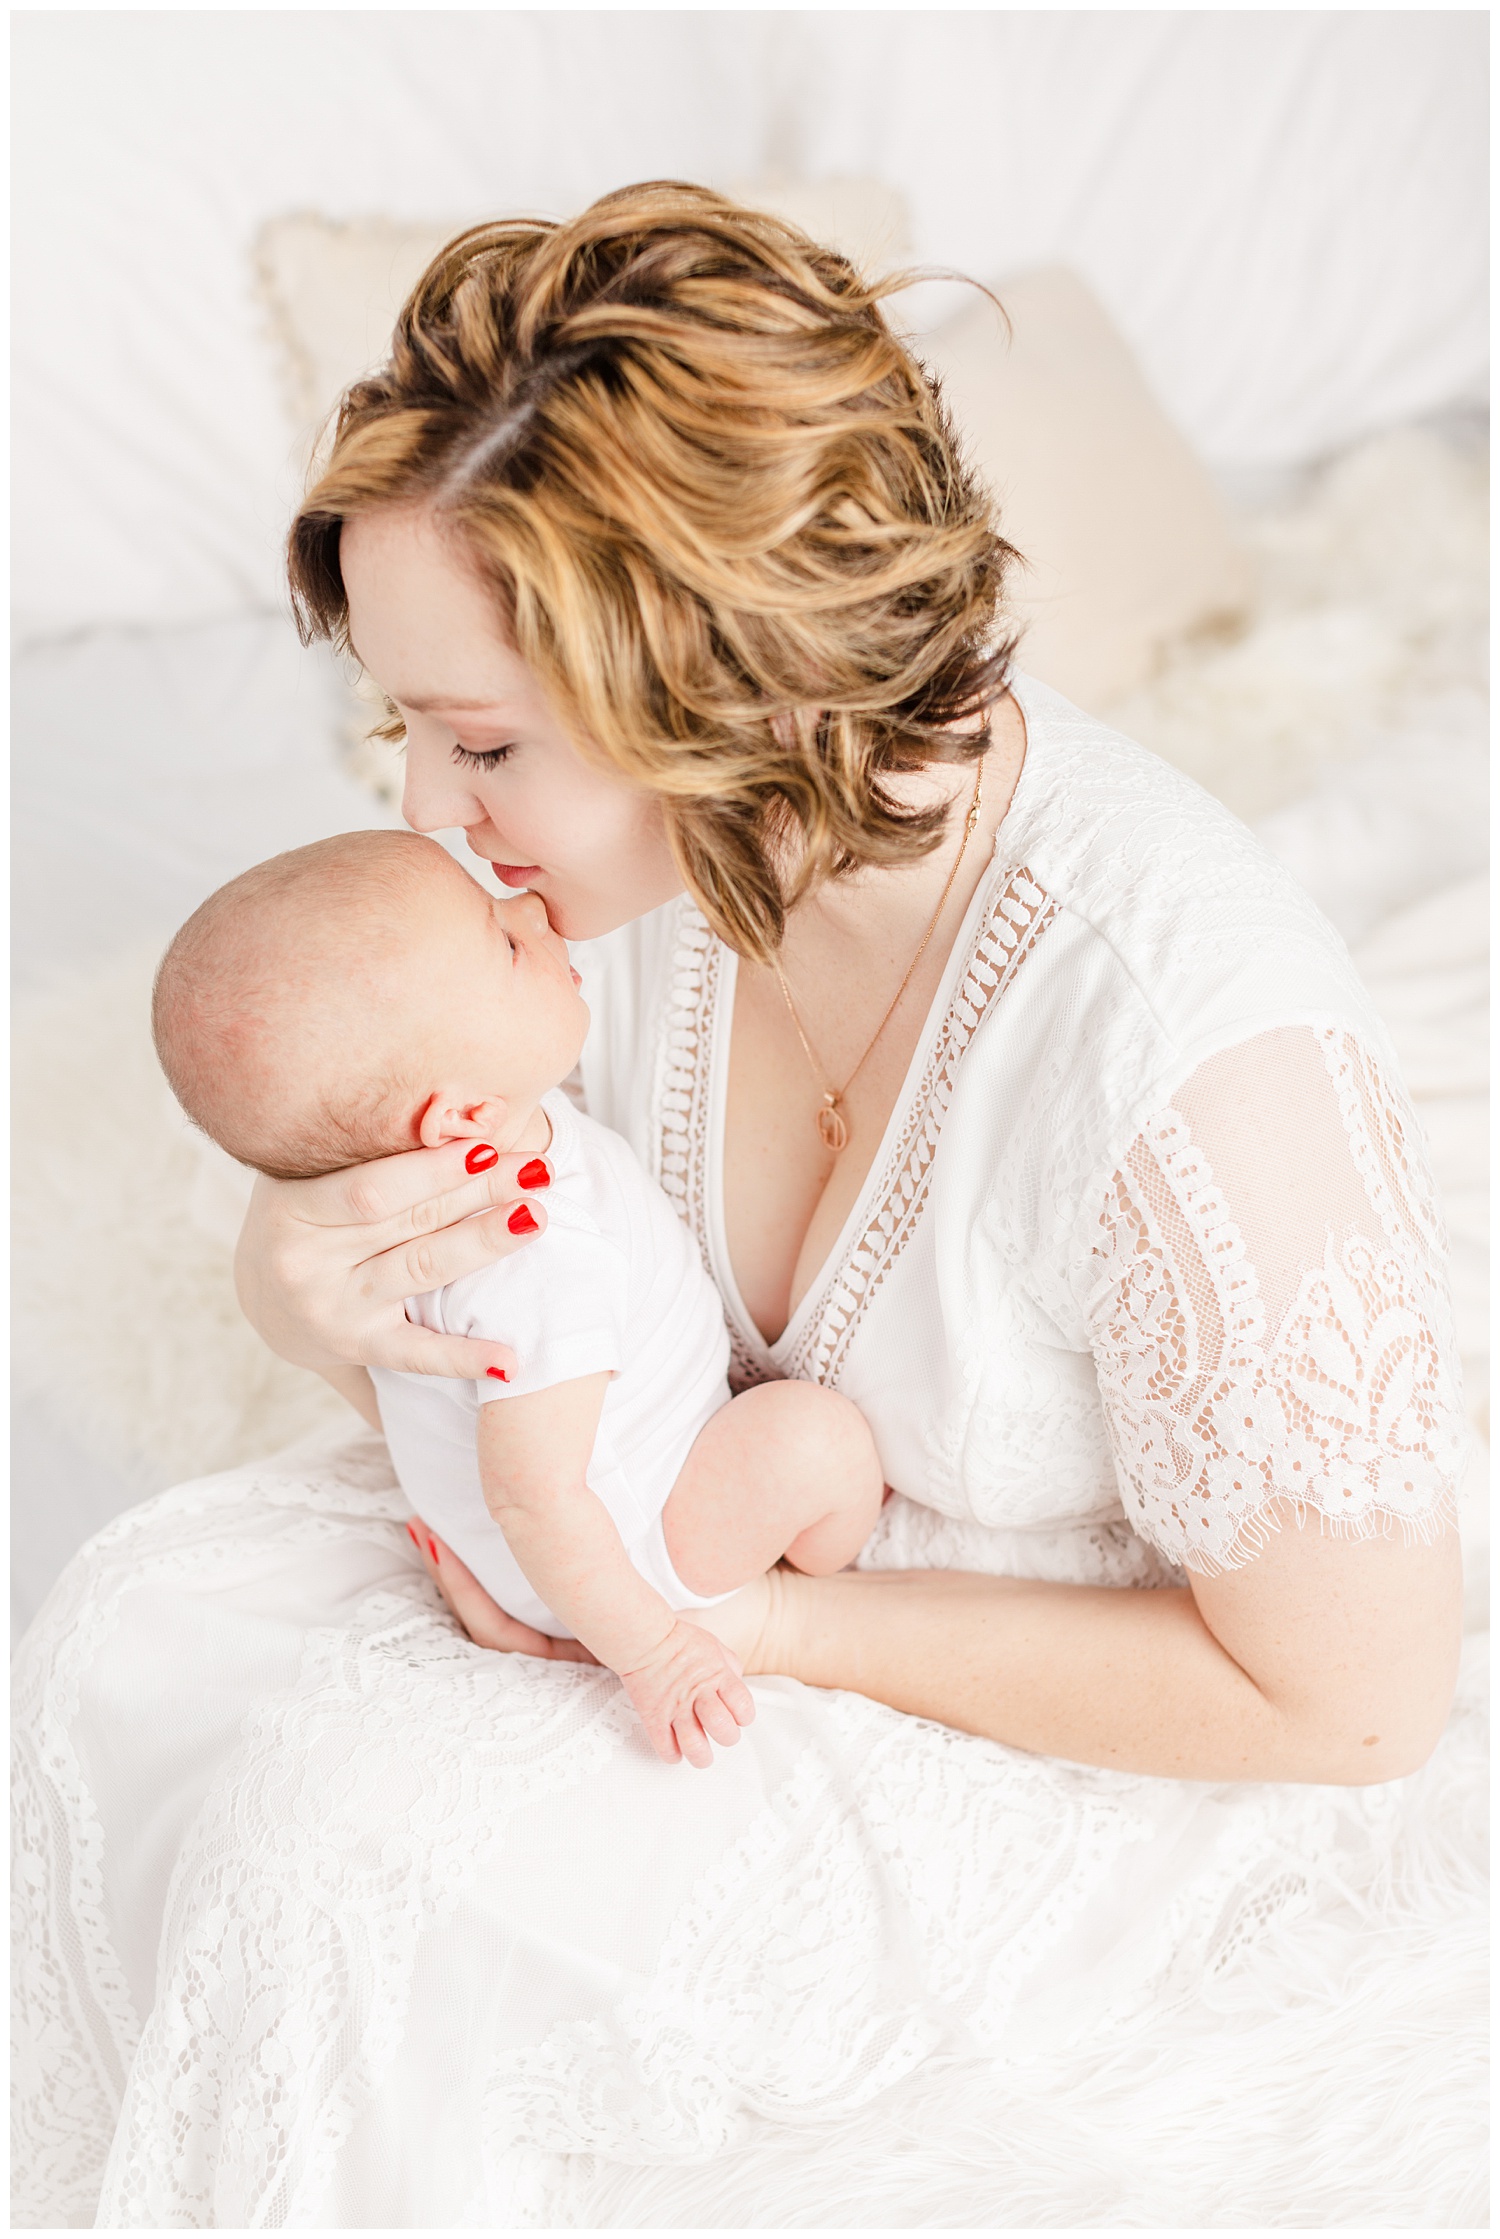 Bree dressed in white lace sits on her bed and gently kisses her new baby boy | CB Studio